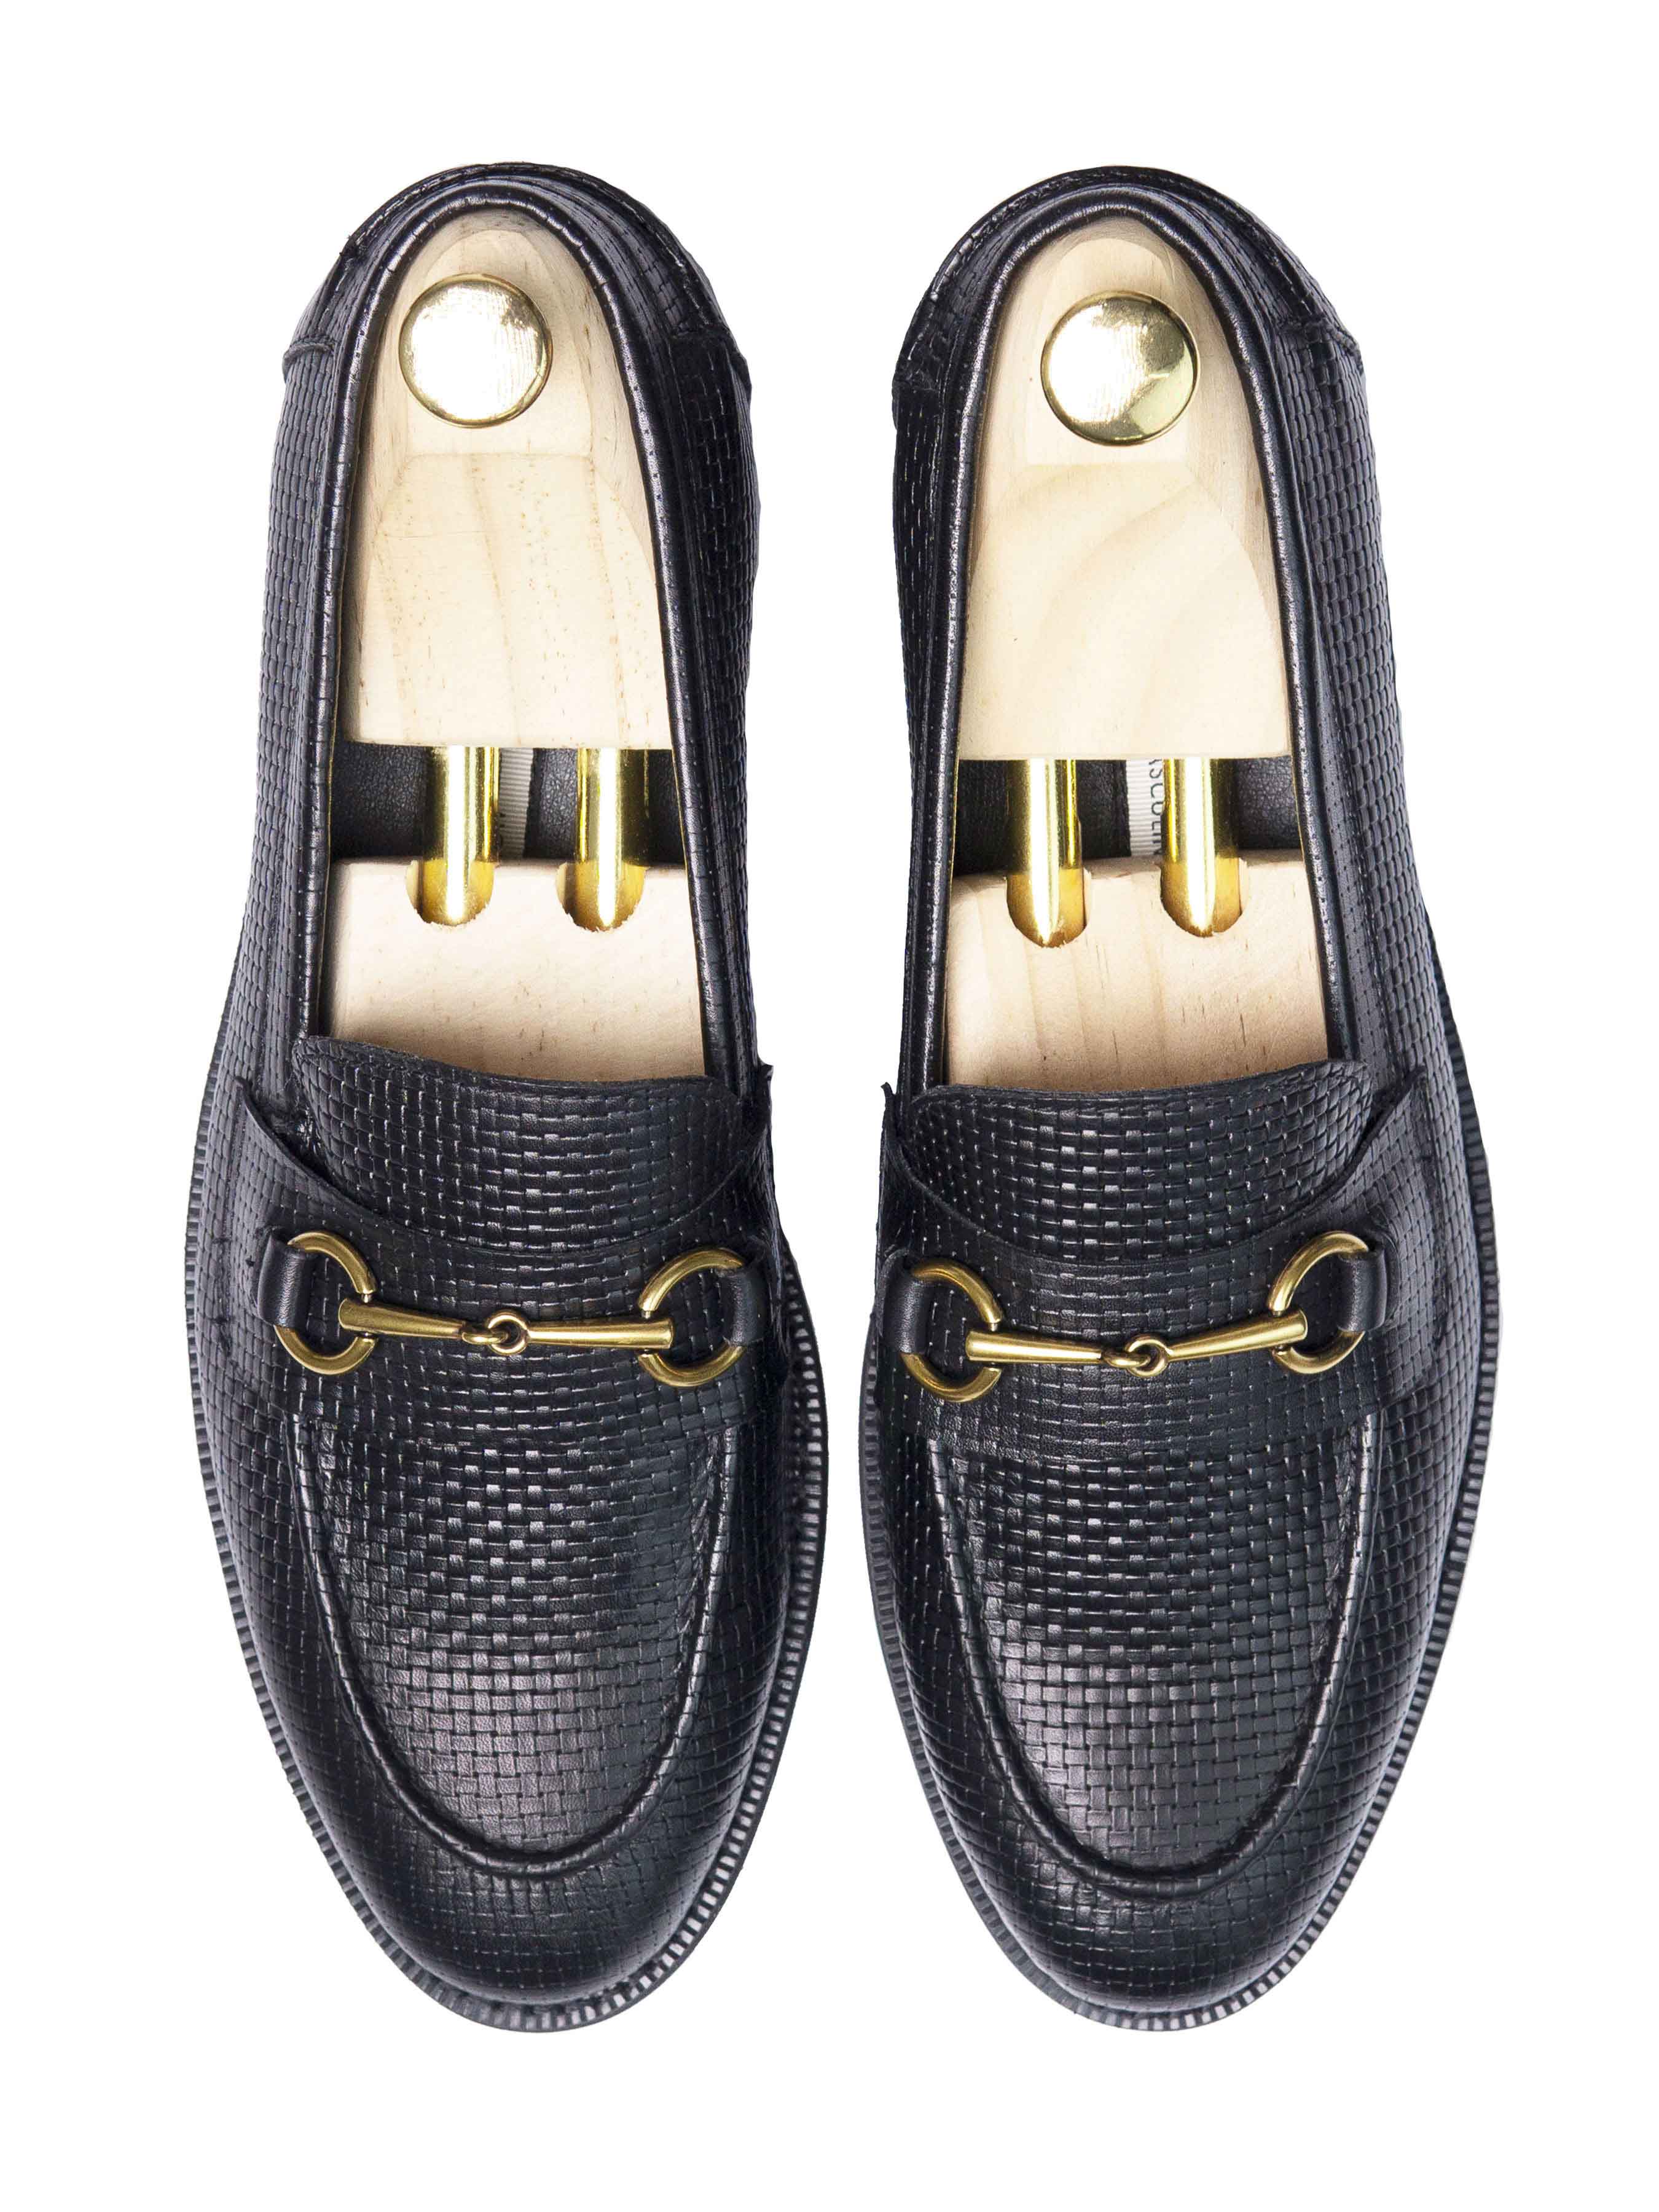 Penny Loafer Horsebit Buckle - Black Woven Leather (Crepe Sole)